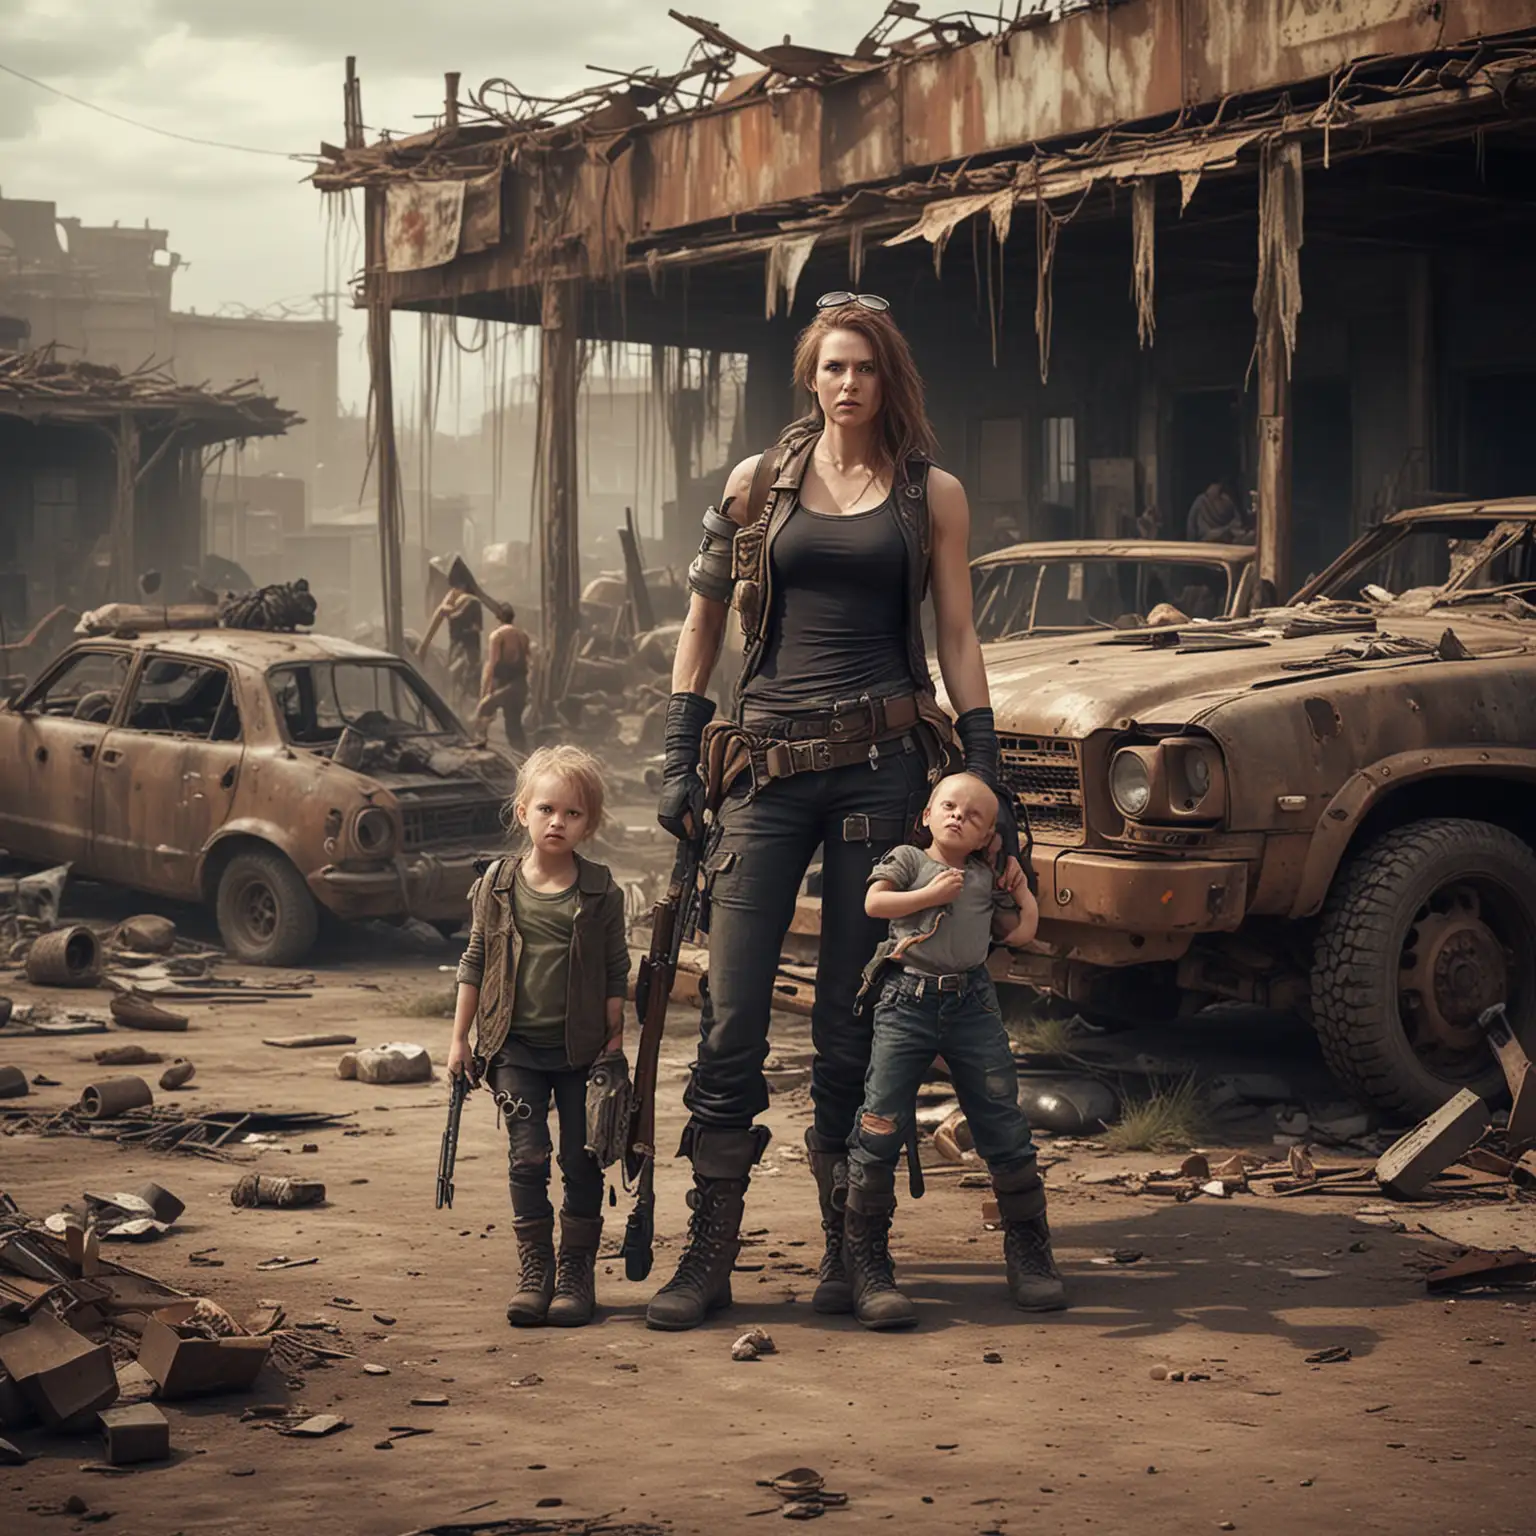 Survivors Family in PostApocalyptic Landscape